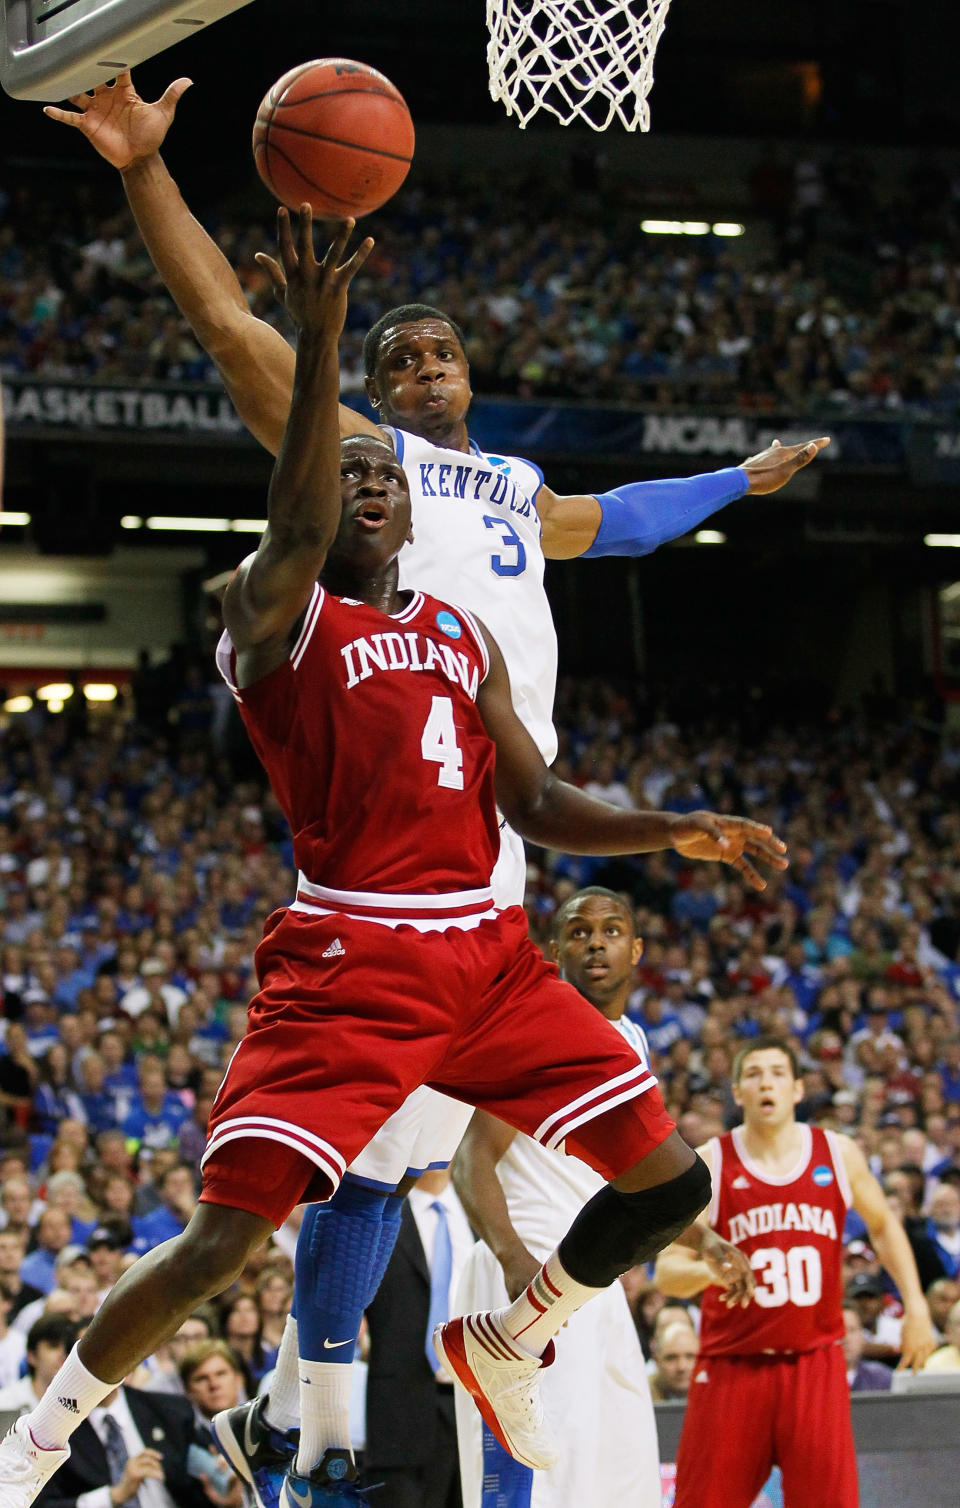 ATLANTA, GA - MARCH 23: Victor Oladipo #4 of the Indiana Hoosiers shoots against the defense of Terrence Jones #3 of the Kentucky Wildcats in the first half during the 2012 NCAA Men's Basketball South Regional Semifinal game at the Georgia Dome on March 23, 2012 in Atlanta, Georgia. (Photo by Kevin C. Cox/Getty Images)